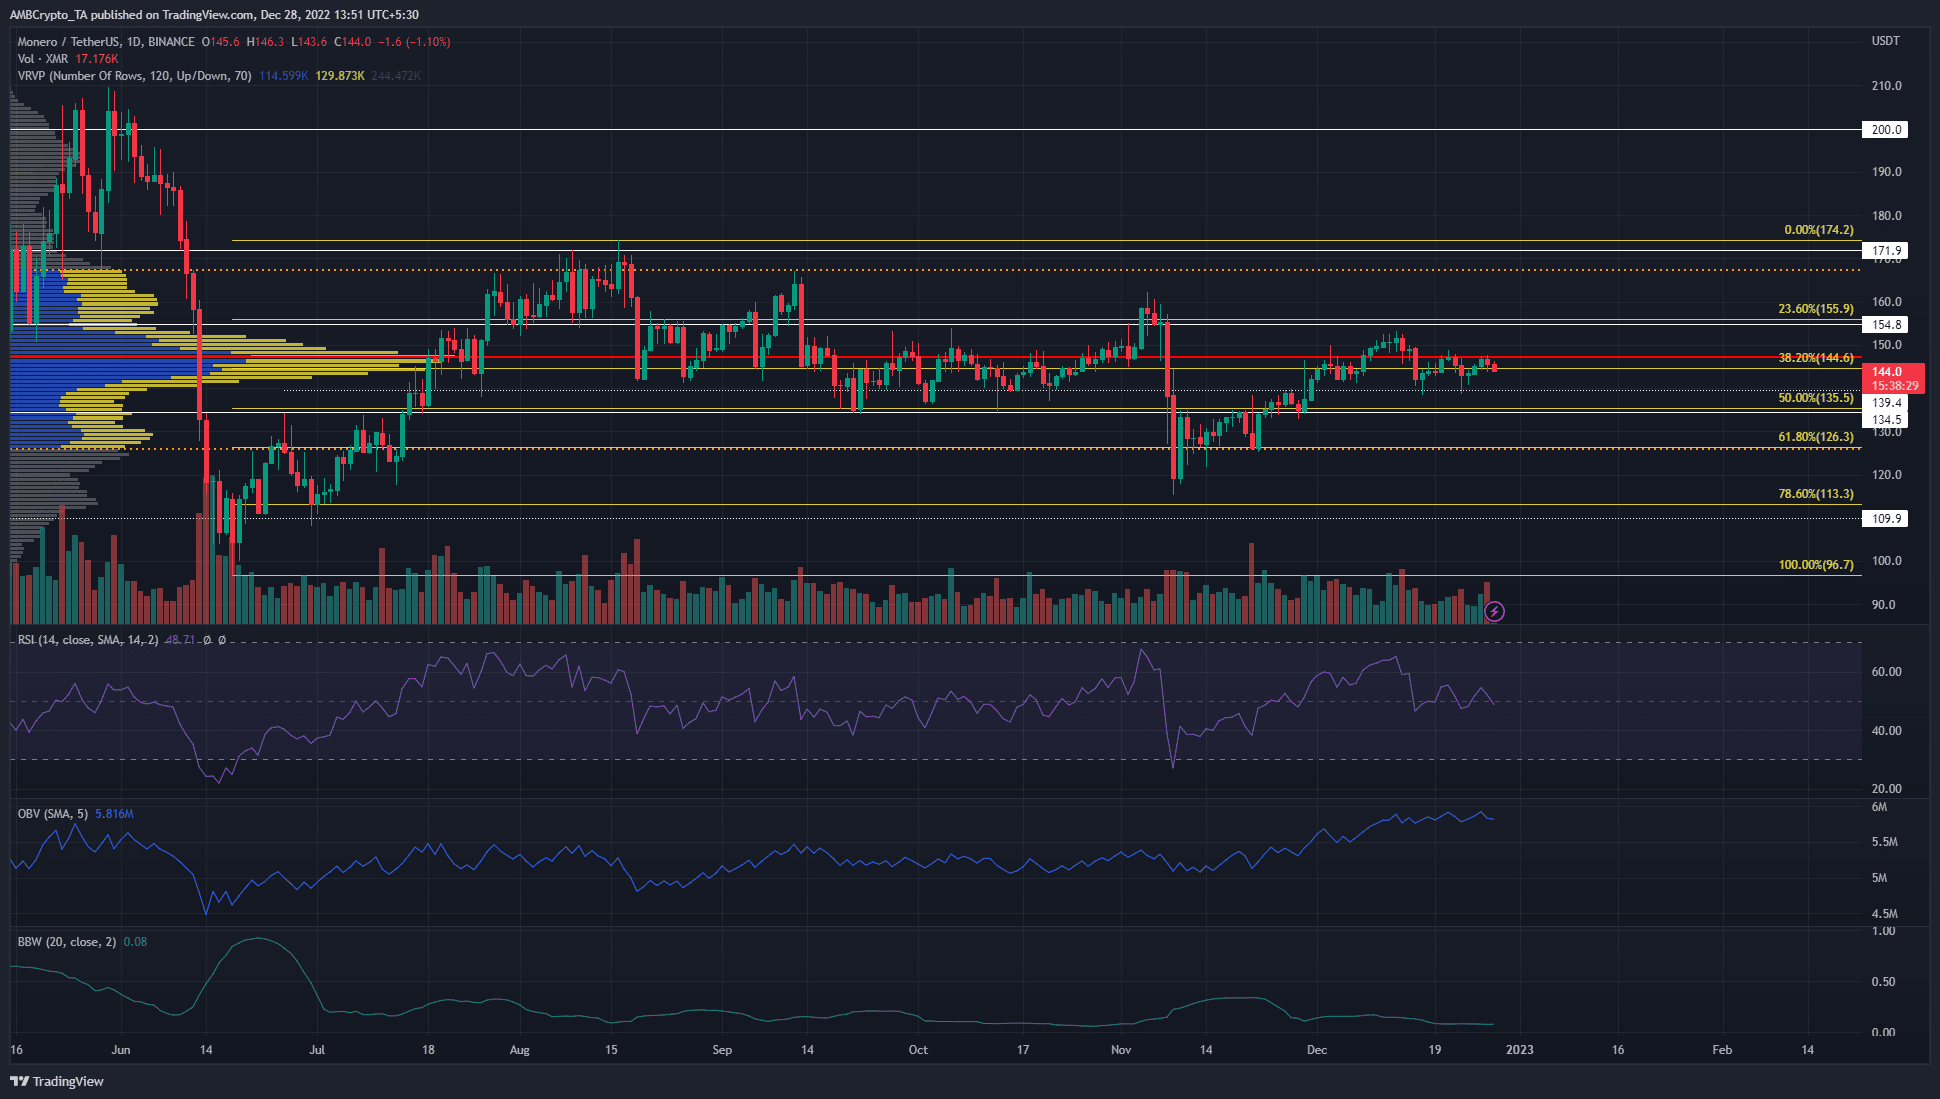 Monero halted after trending upward the past month, where to next?